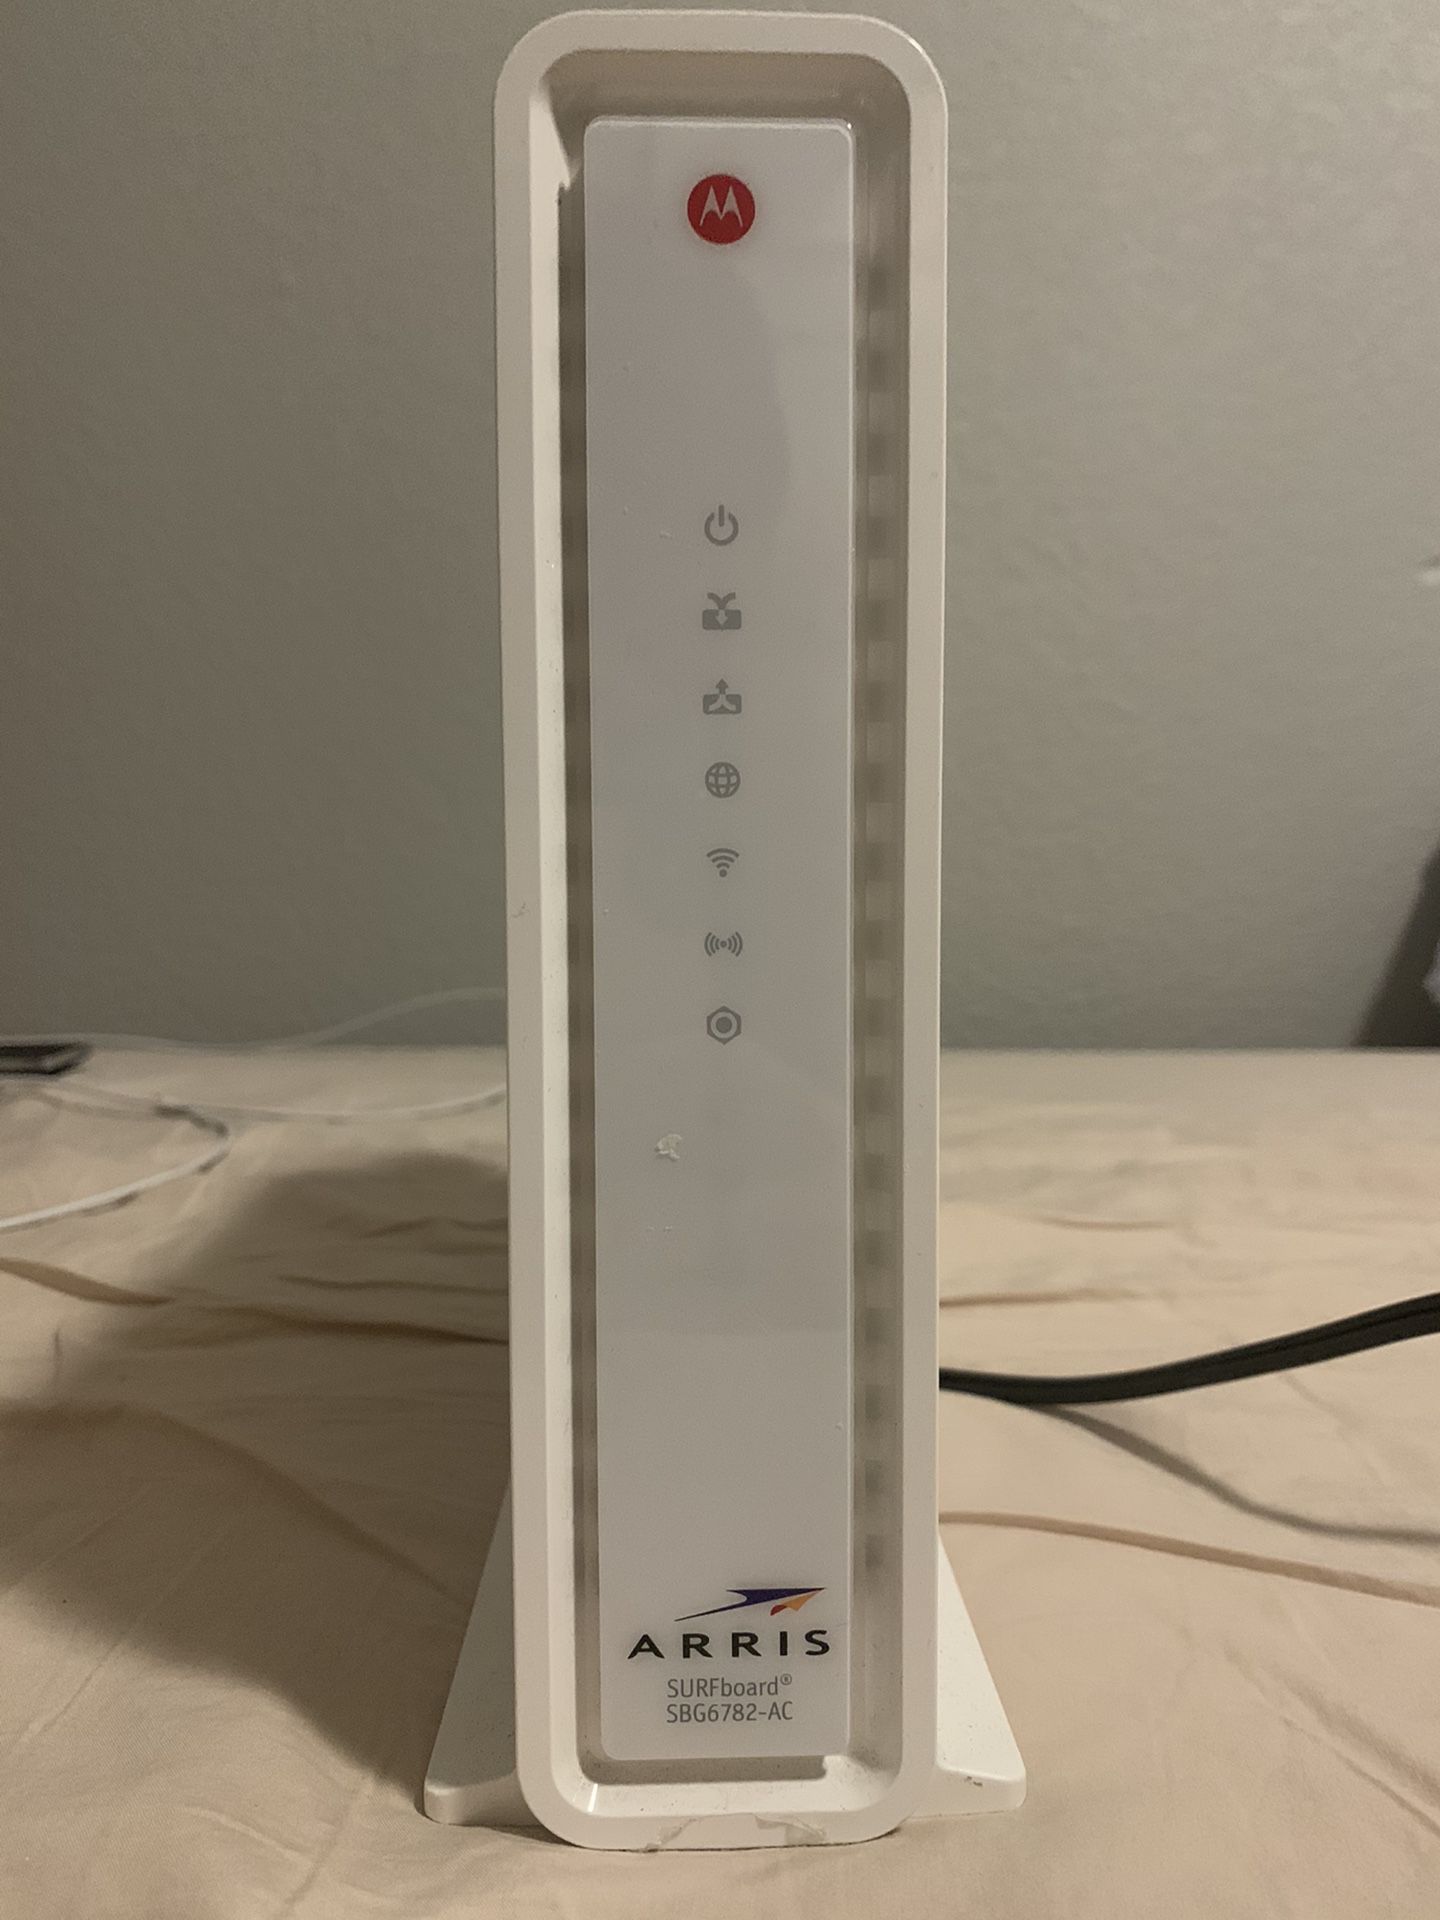 Arris SURFboard SBG6782AC DOCSIS 3.0 Cable Modem/ Wifi AC 1750 Router